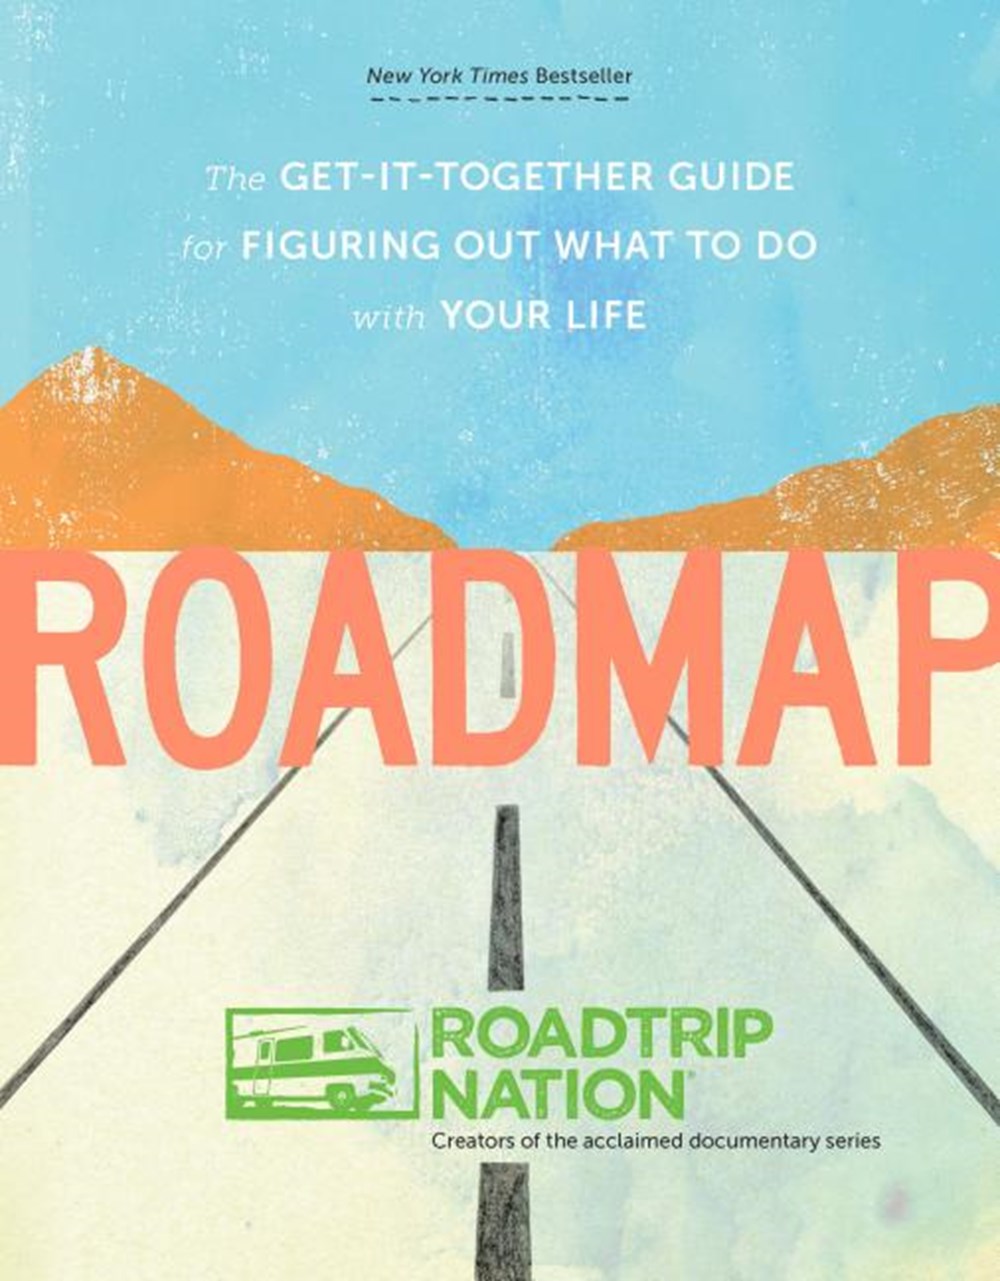 Roadmap: The Get-It-Together Guide for Figuring Out What to Do with Your Life (Book for Figuring Shi